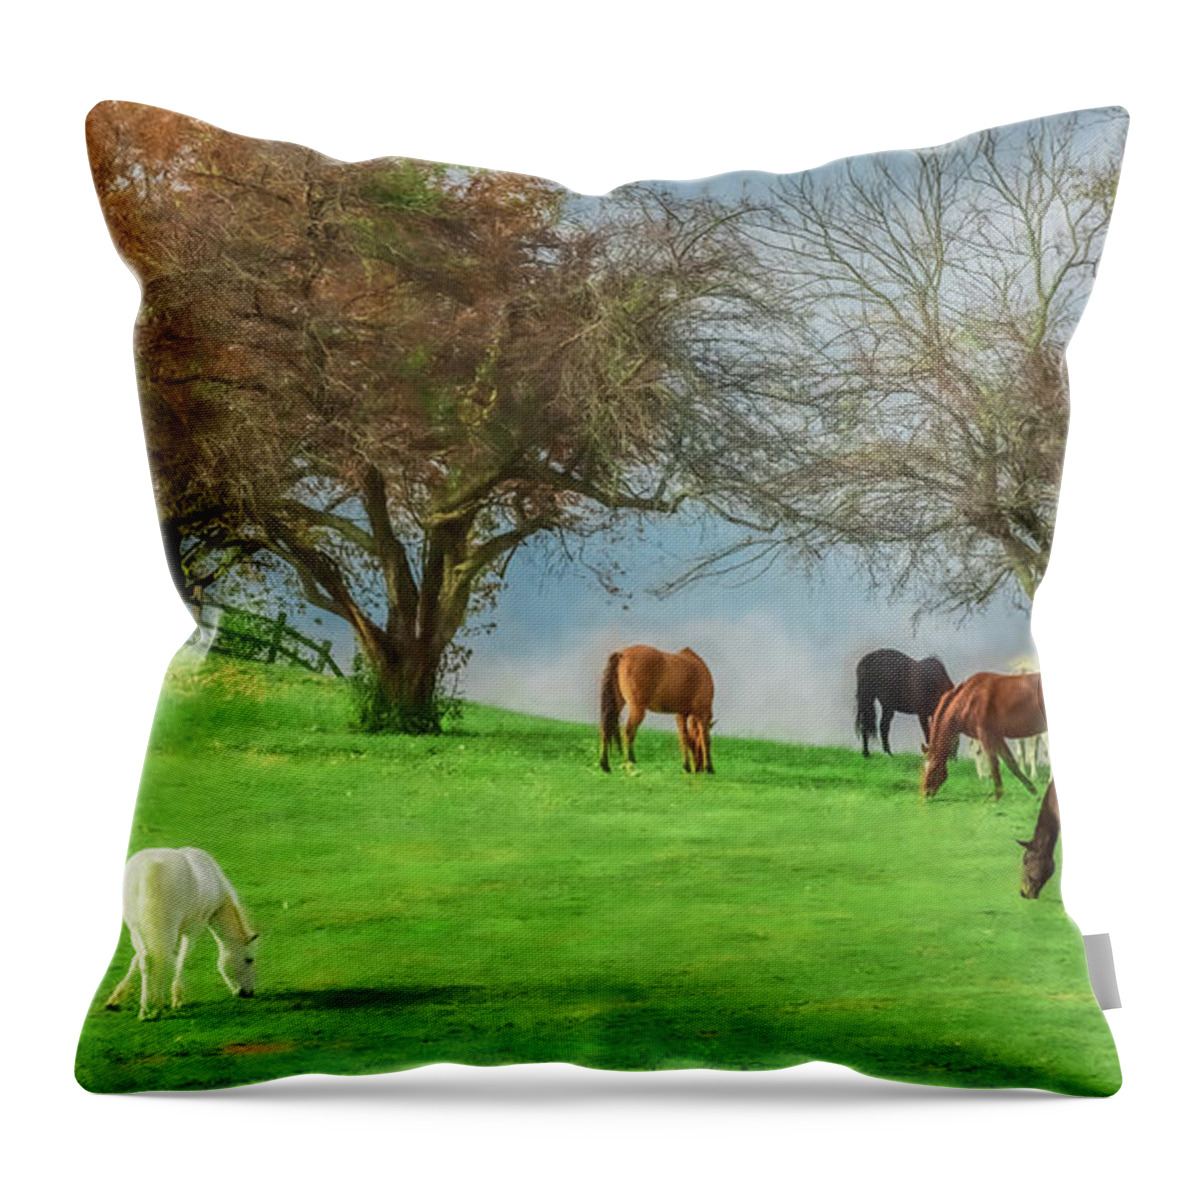 Horses Throw Pillow featuring the photograph County Living by Kevin Lane